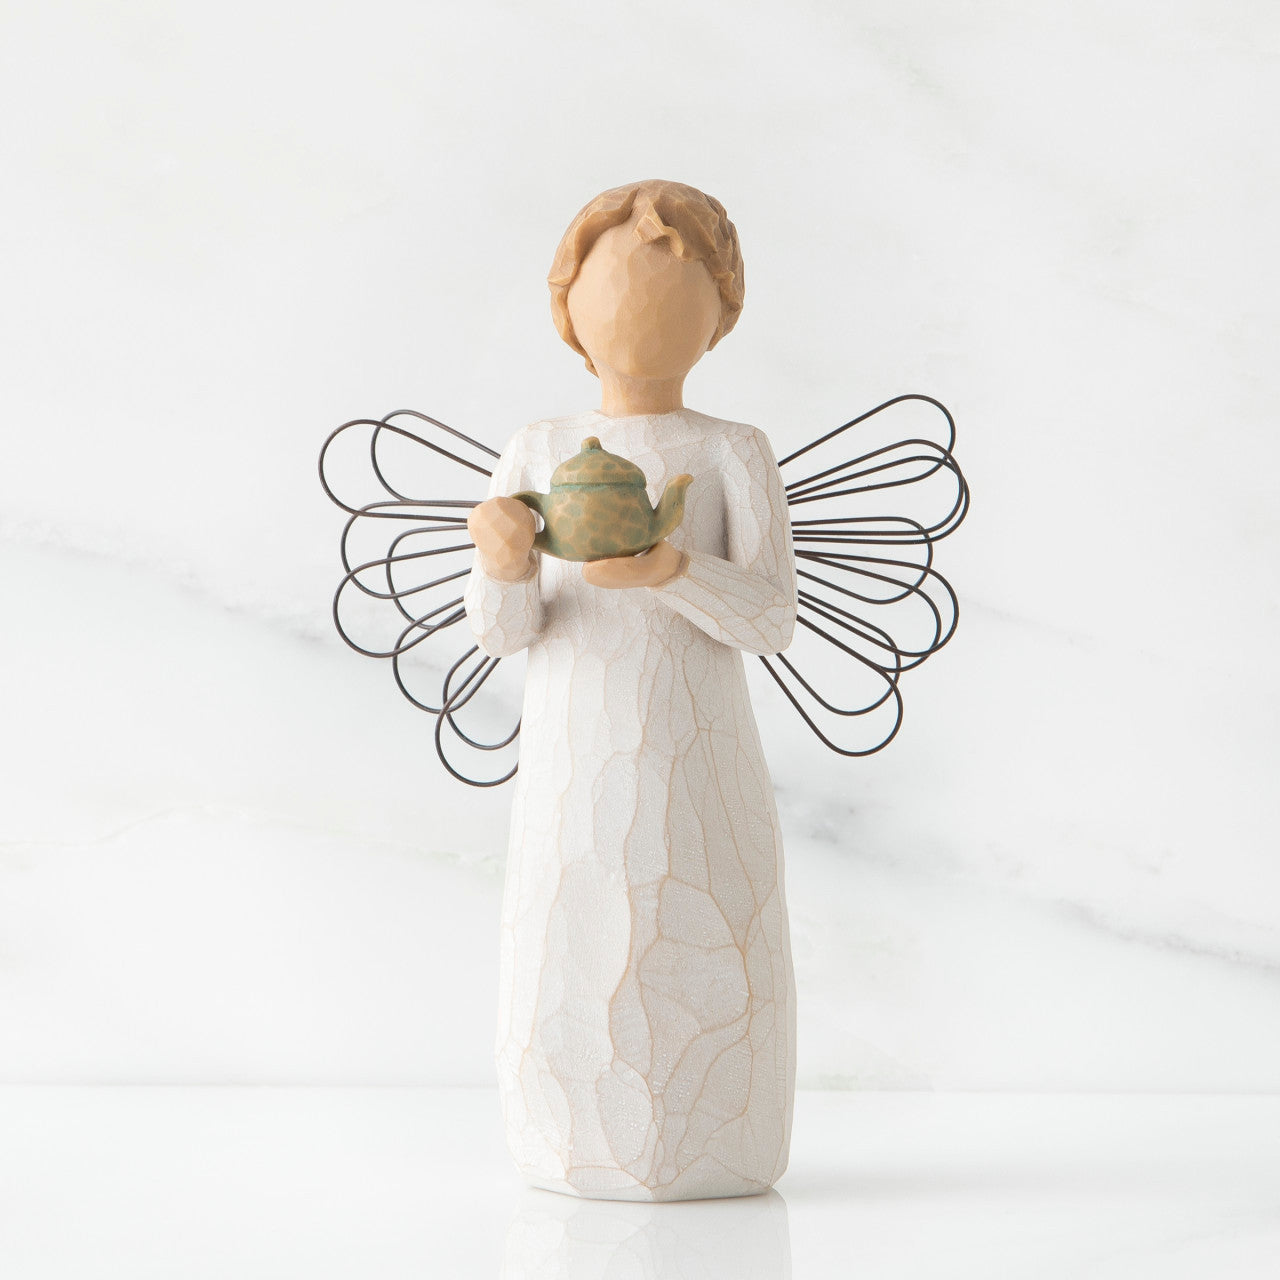 Willow Tree Angel of the Kitchen